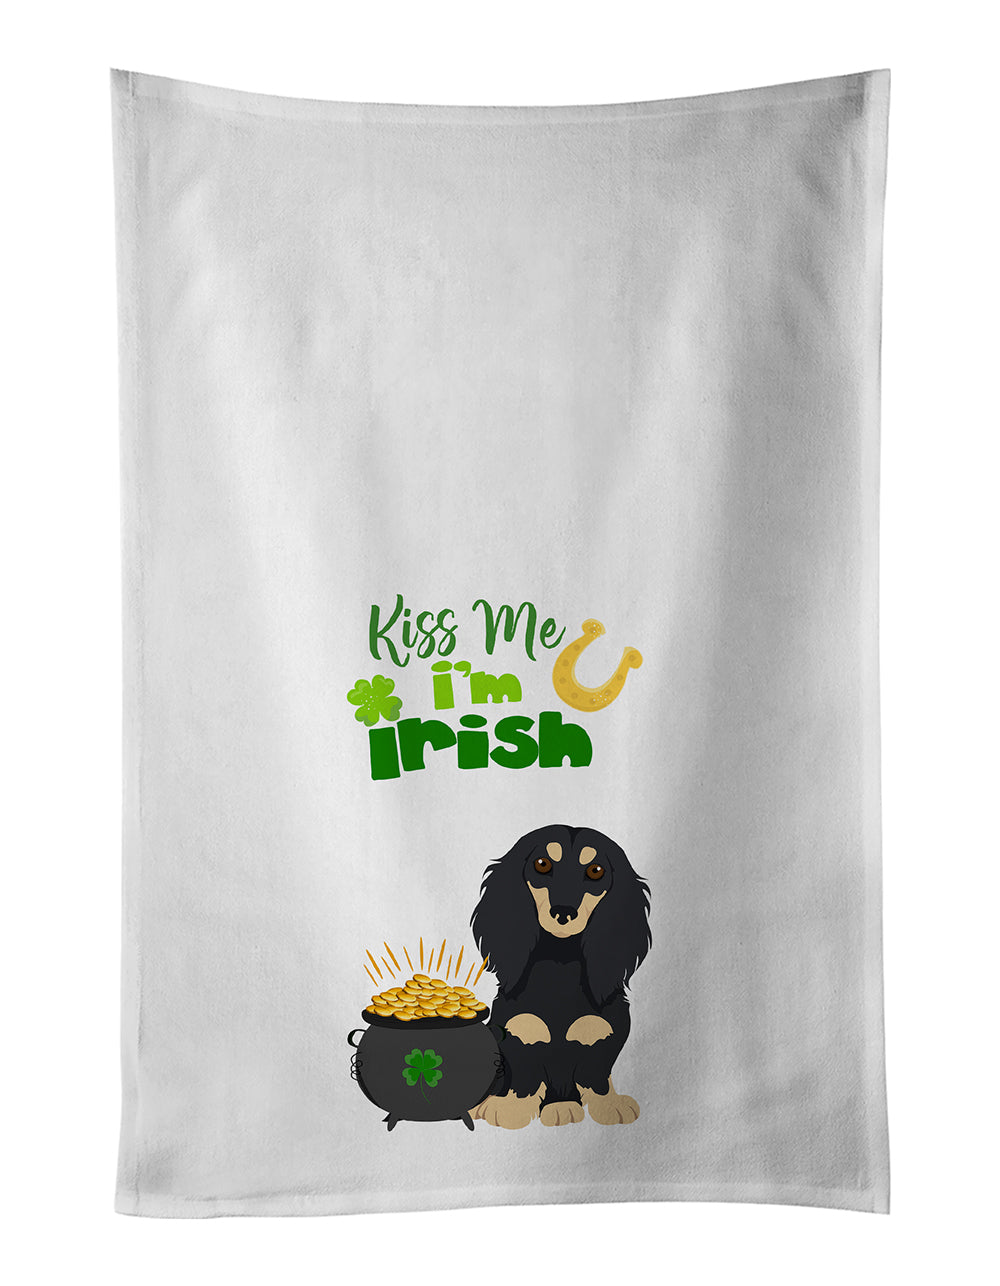 Buy this Longhair Black and Cream Dachshund St. Patrick's Day White Kitchen Towel Set of 2 Dish Towels